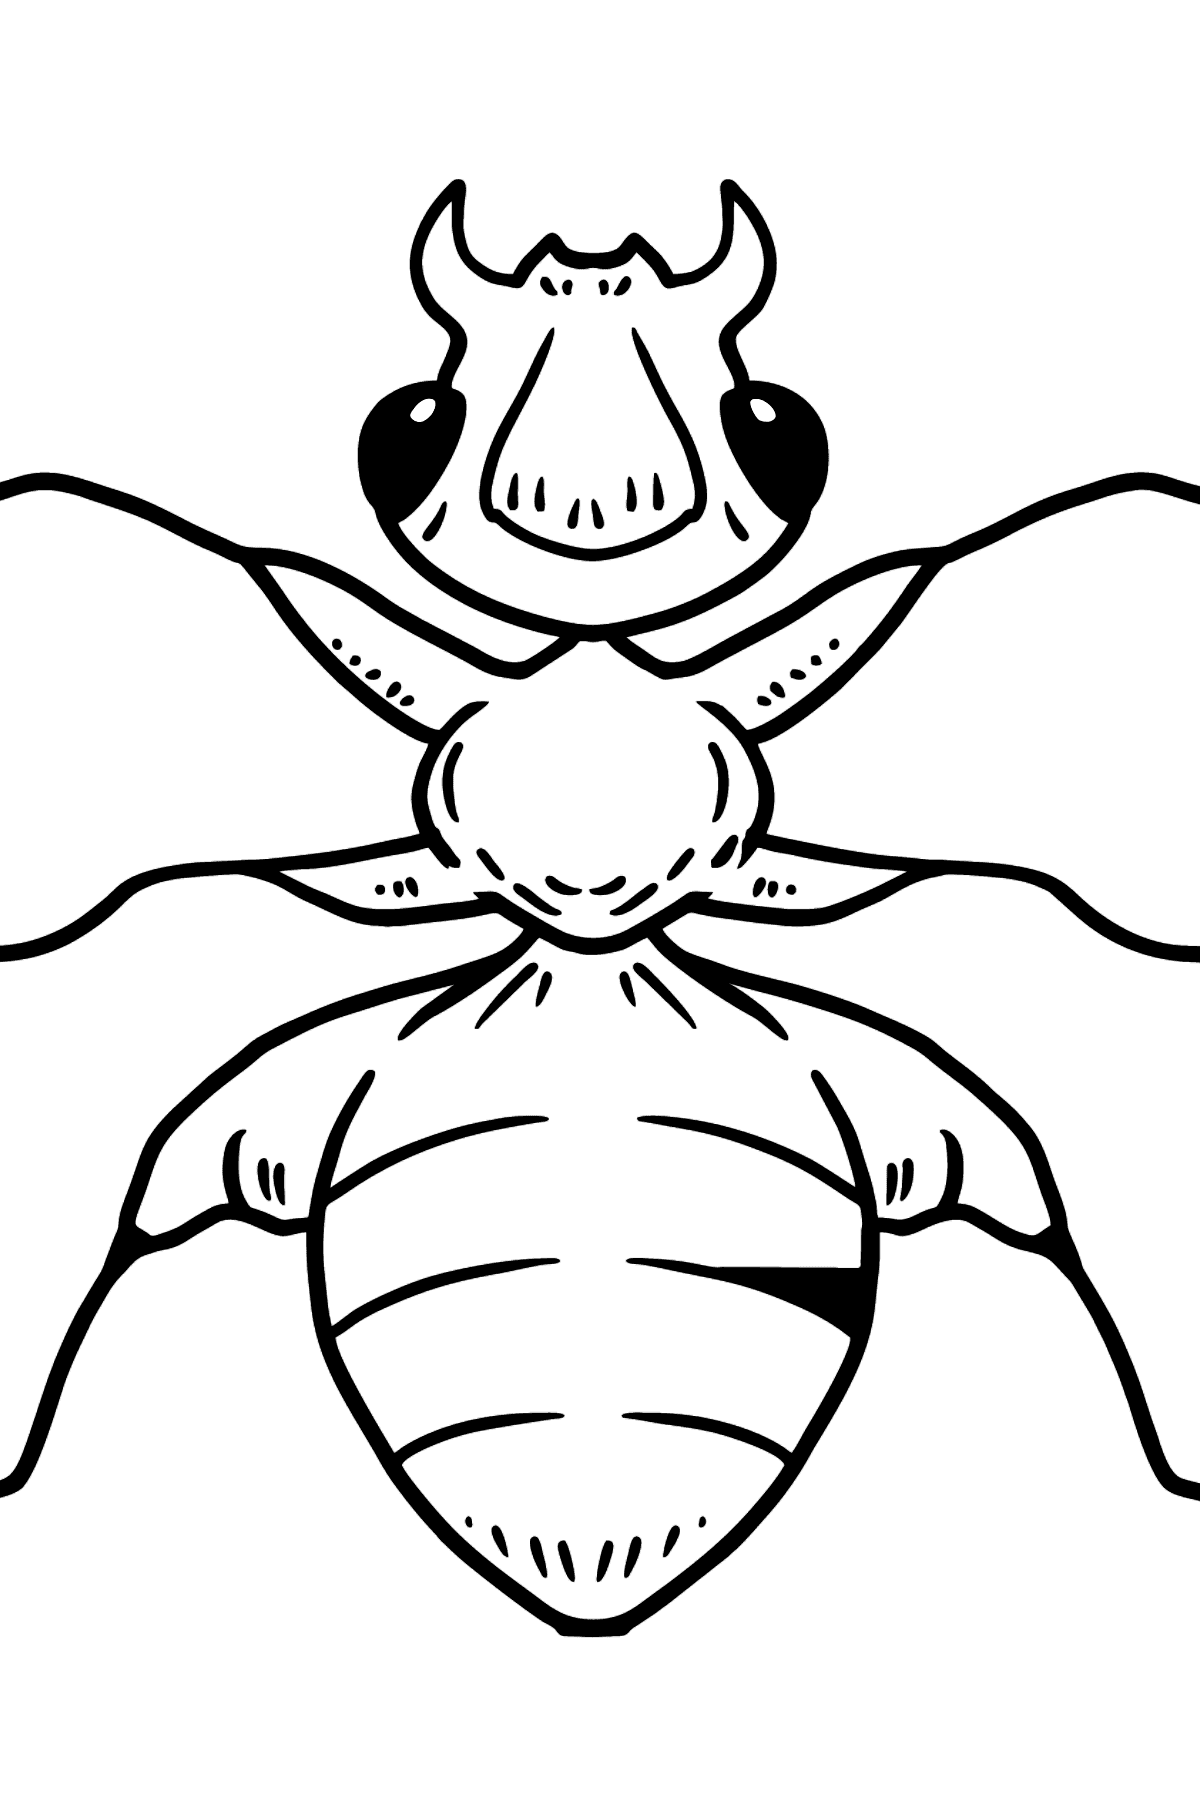 Ant coloring page - Coloring Pages for Kids